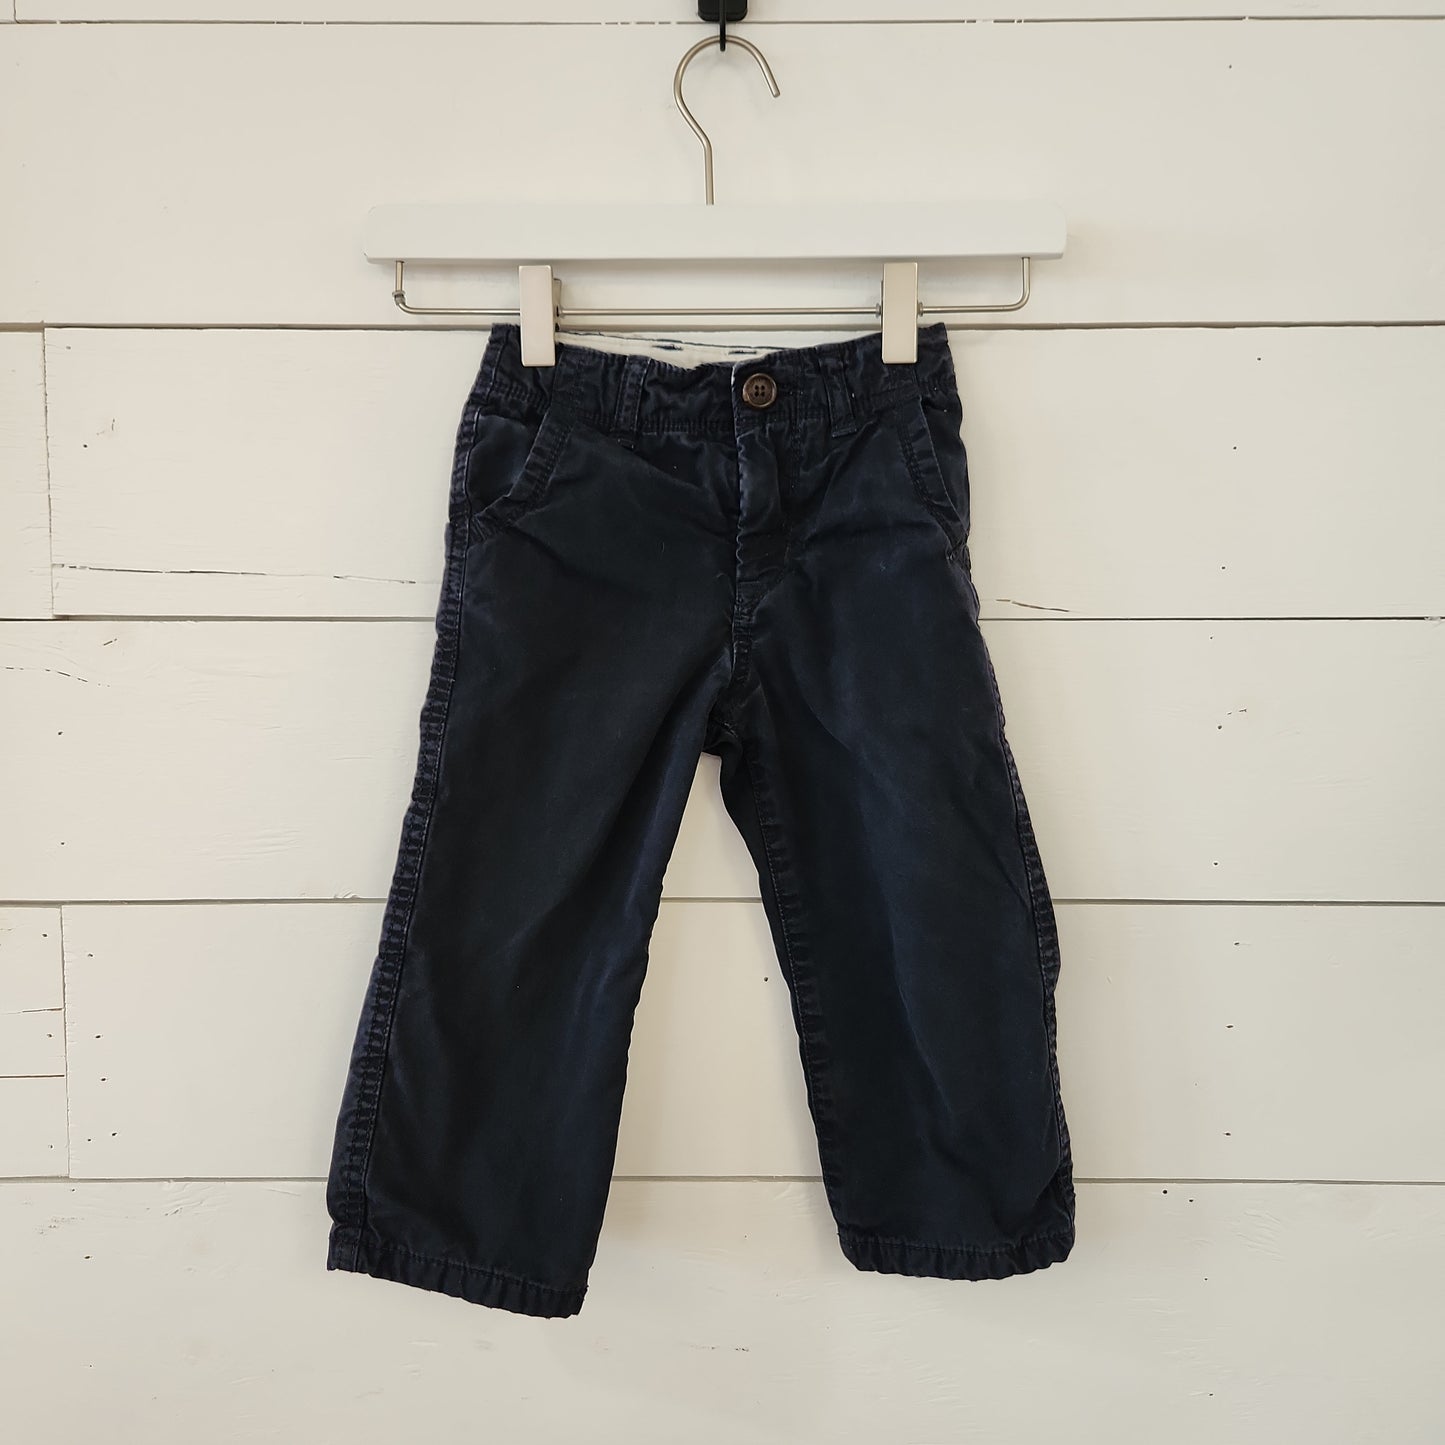 Size 2t | Gap Jersey Lined Chinos | Secondhand